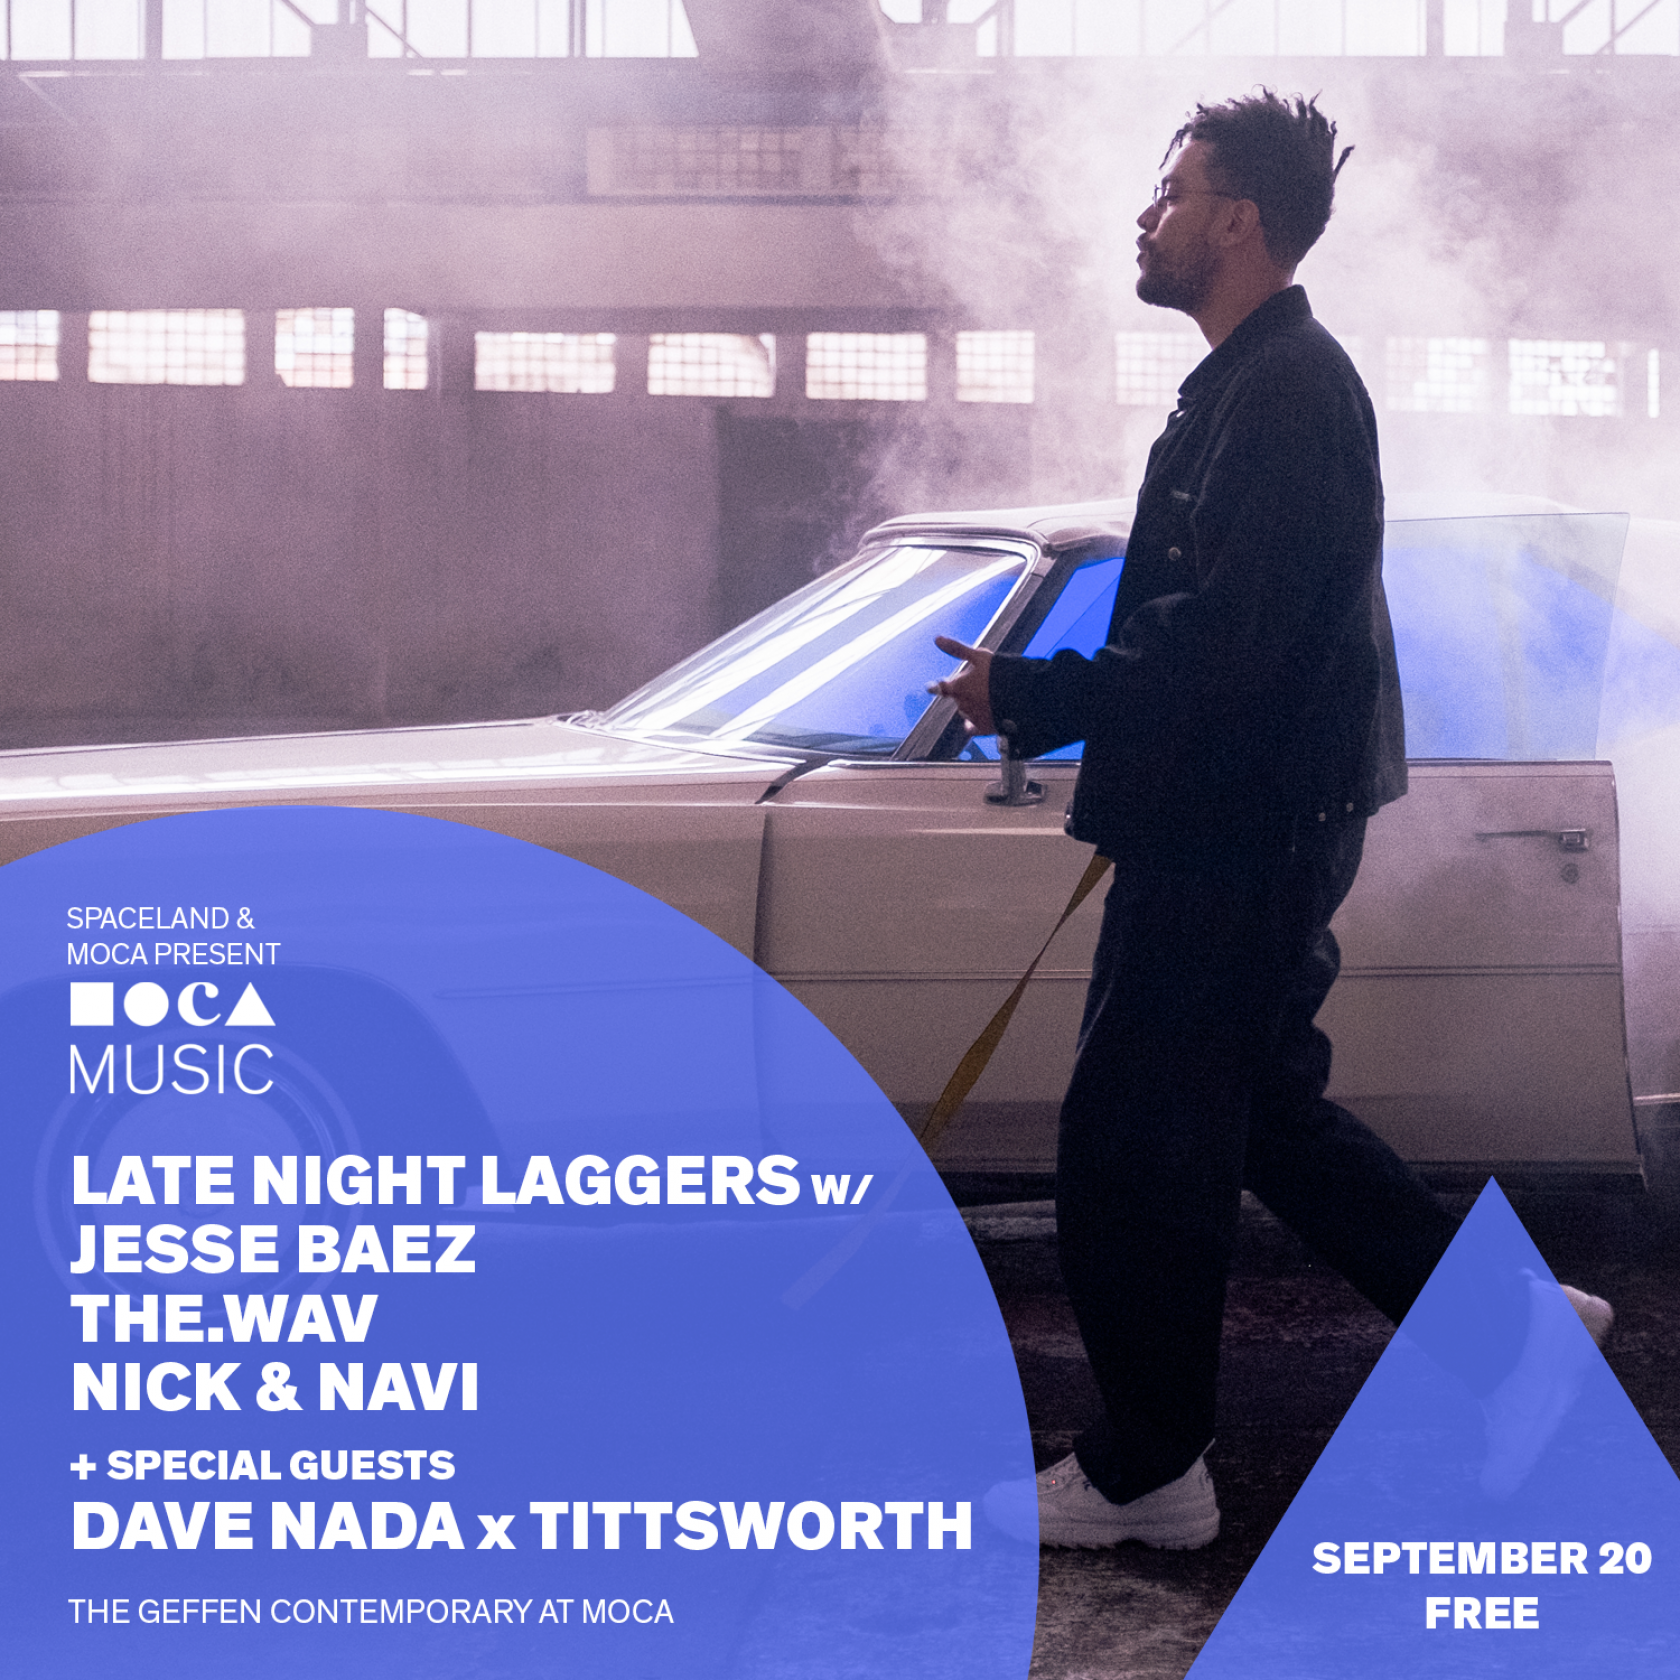 MOCA Music: LATE NIGHT LAGGERS WITH JESSE BAEZ, THE.WAV, NICK & NAVI + SPECIAL GUESTS DAVE NADA X TITTSWORTH